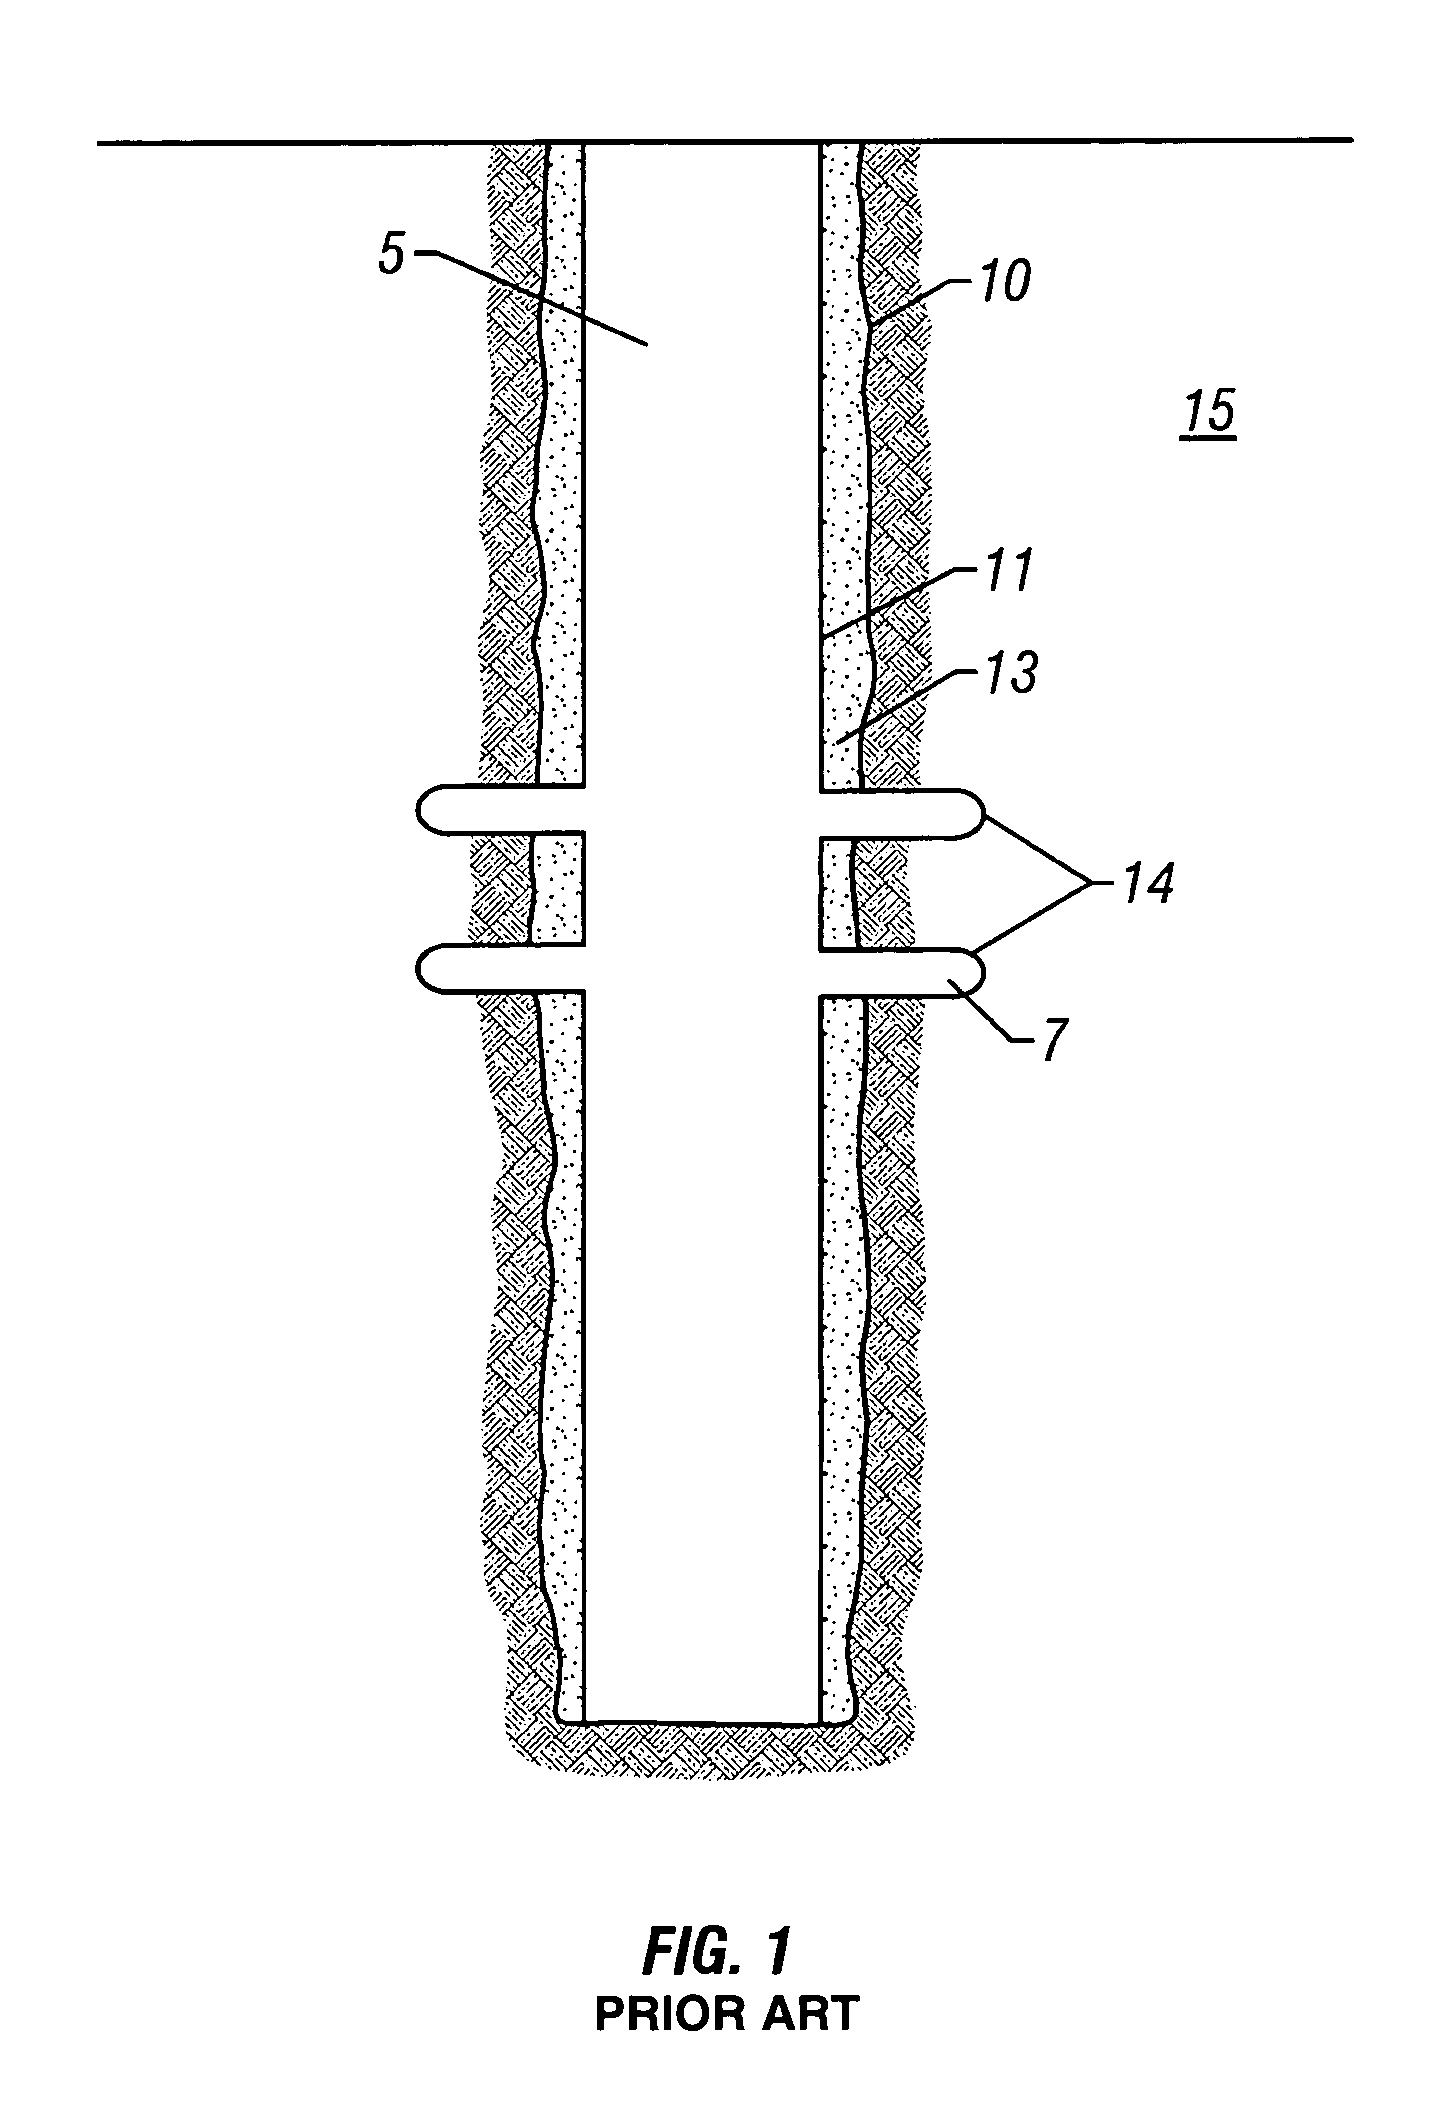 Method of predicting the on-set of formation solid production in high-rate perforated and open hole gas wells